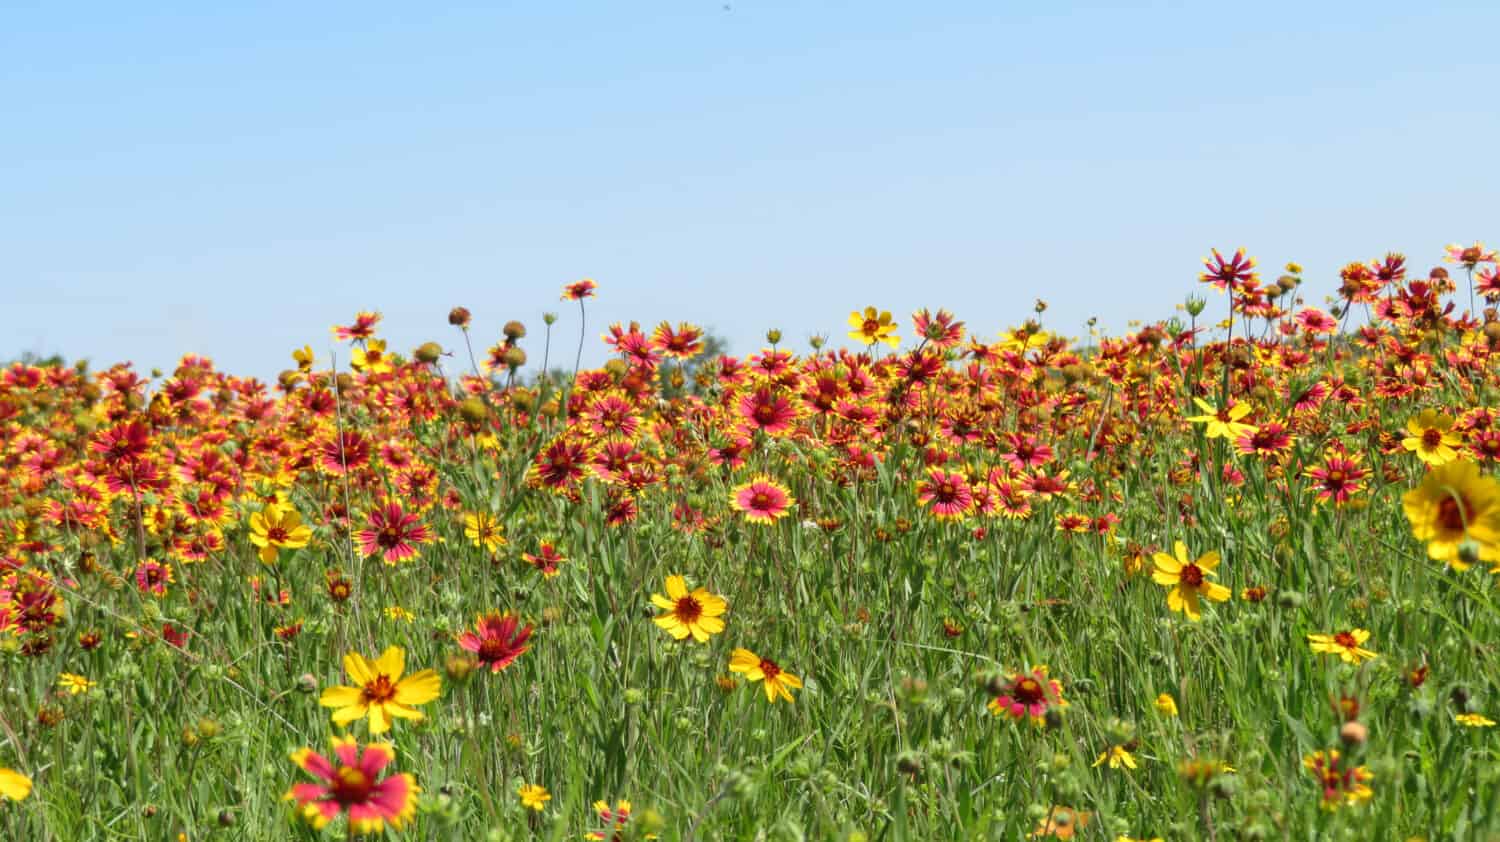 Indian Blanket Wildflowers cover a field in the Texas Hill Country outside Bandera, Texas.            